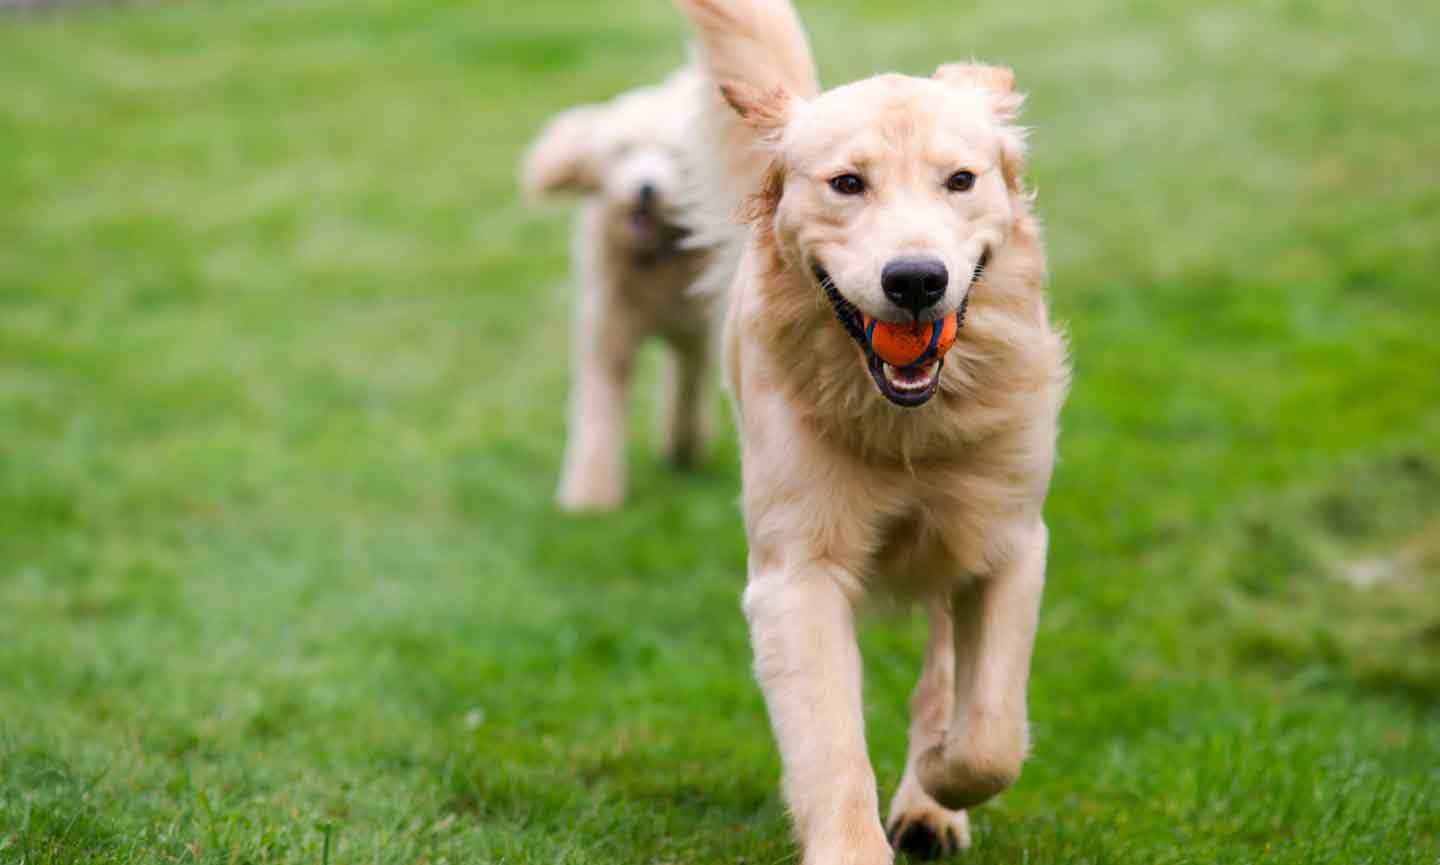 A Golden Retriever running in grass with a ball in their mouth